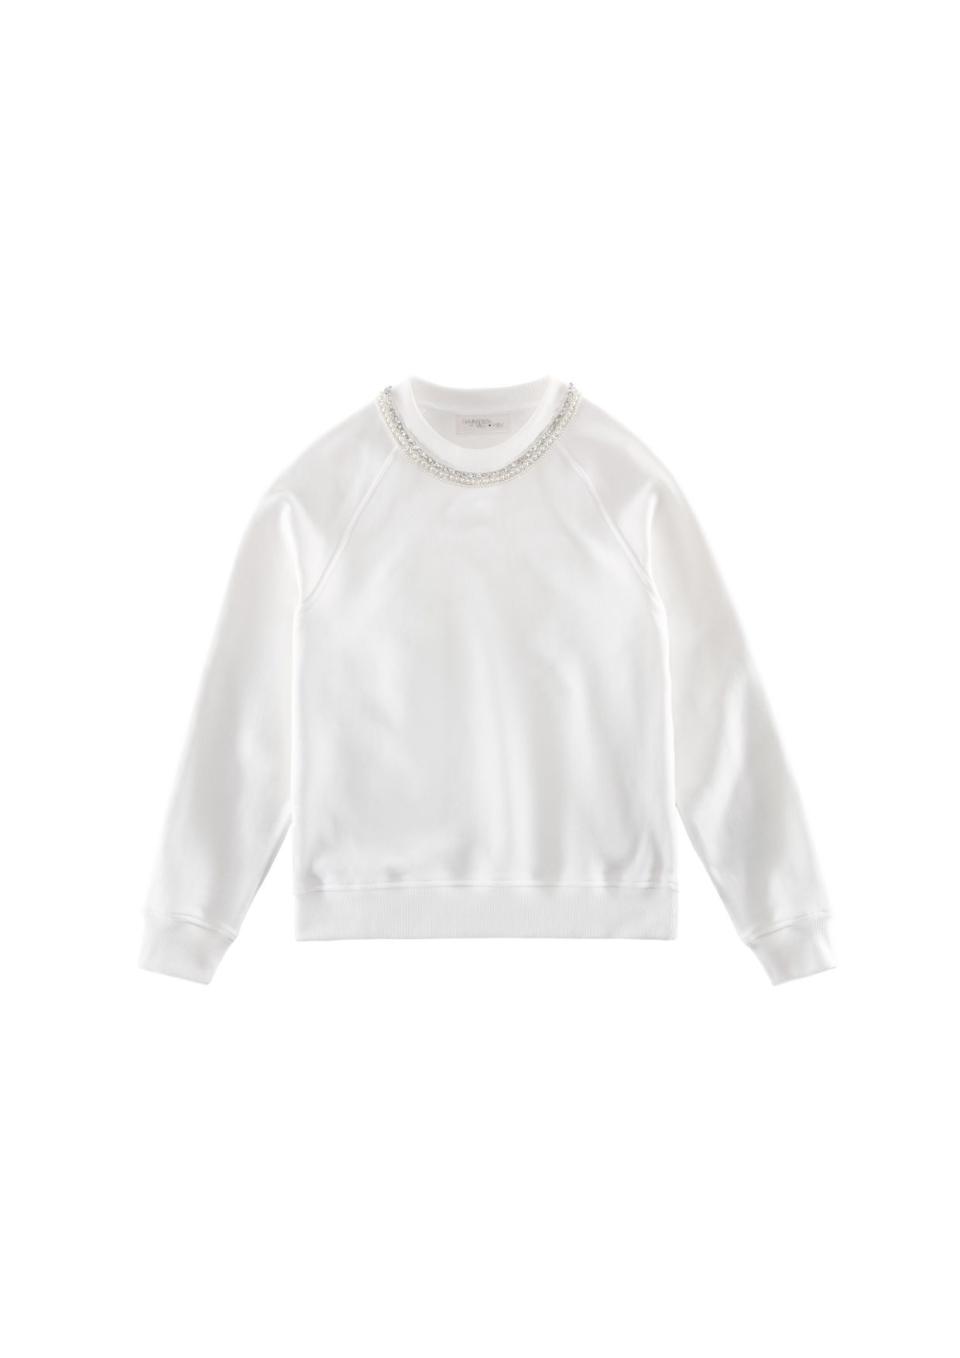 Crewneck embellished sweater in white, $119. (PHOTO: H&M)